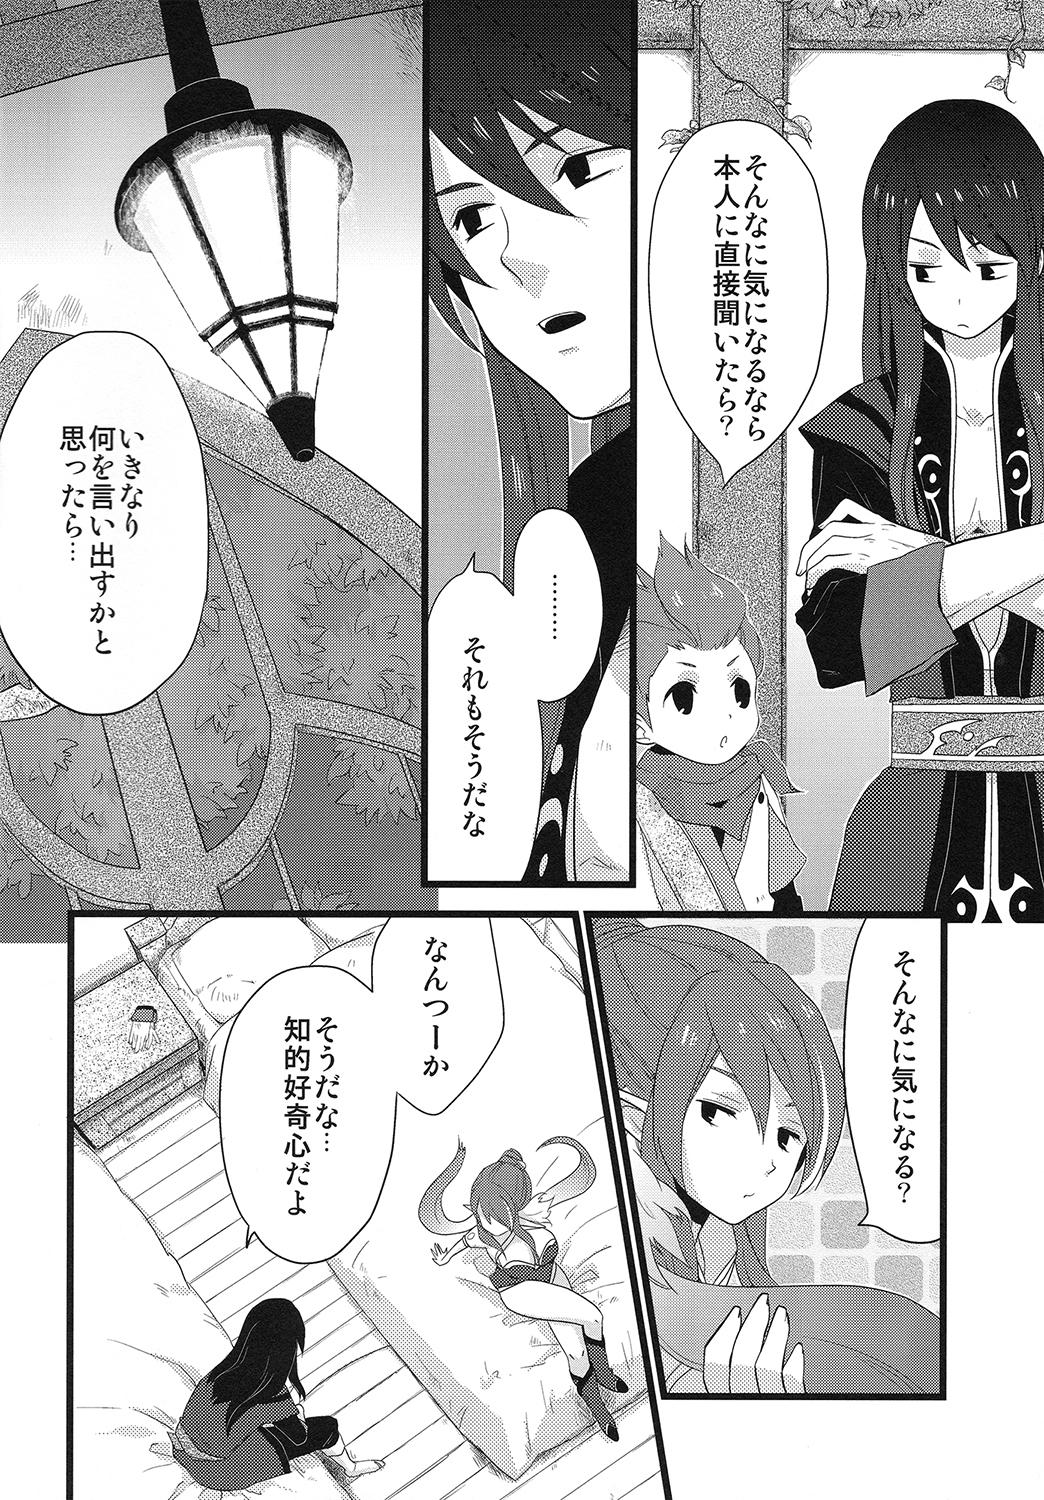 18yearsold Milk Junkie - Tales of vesperia Passion - Page 5